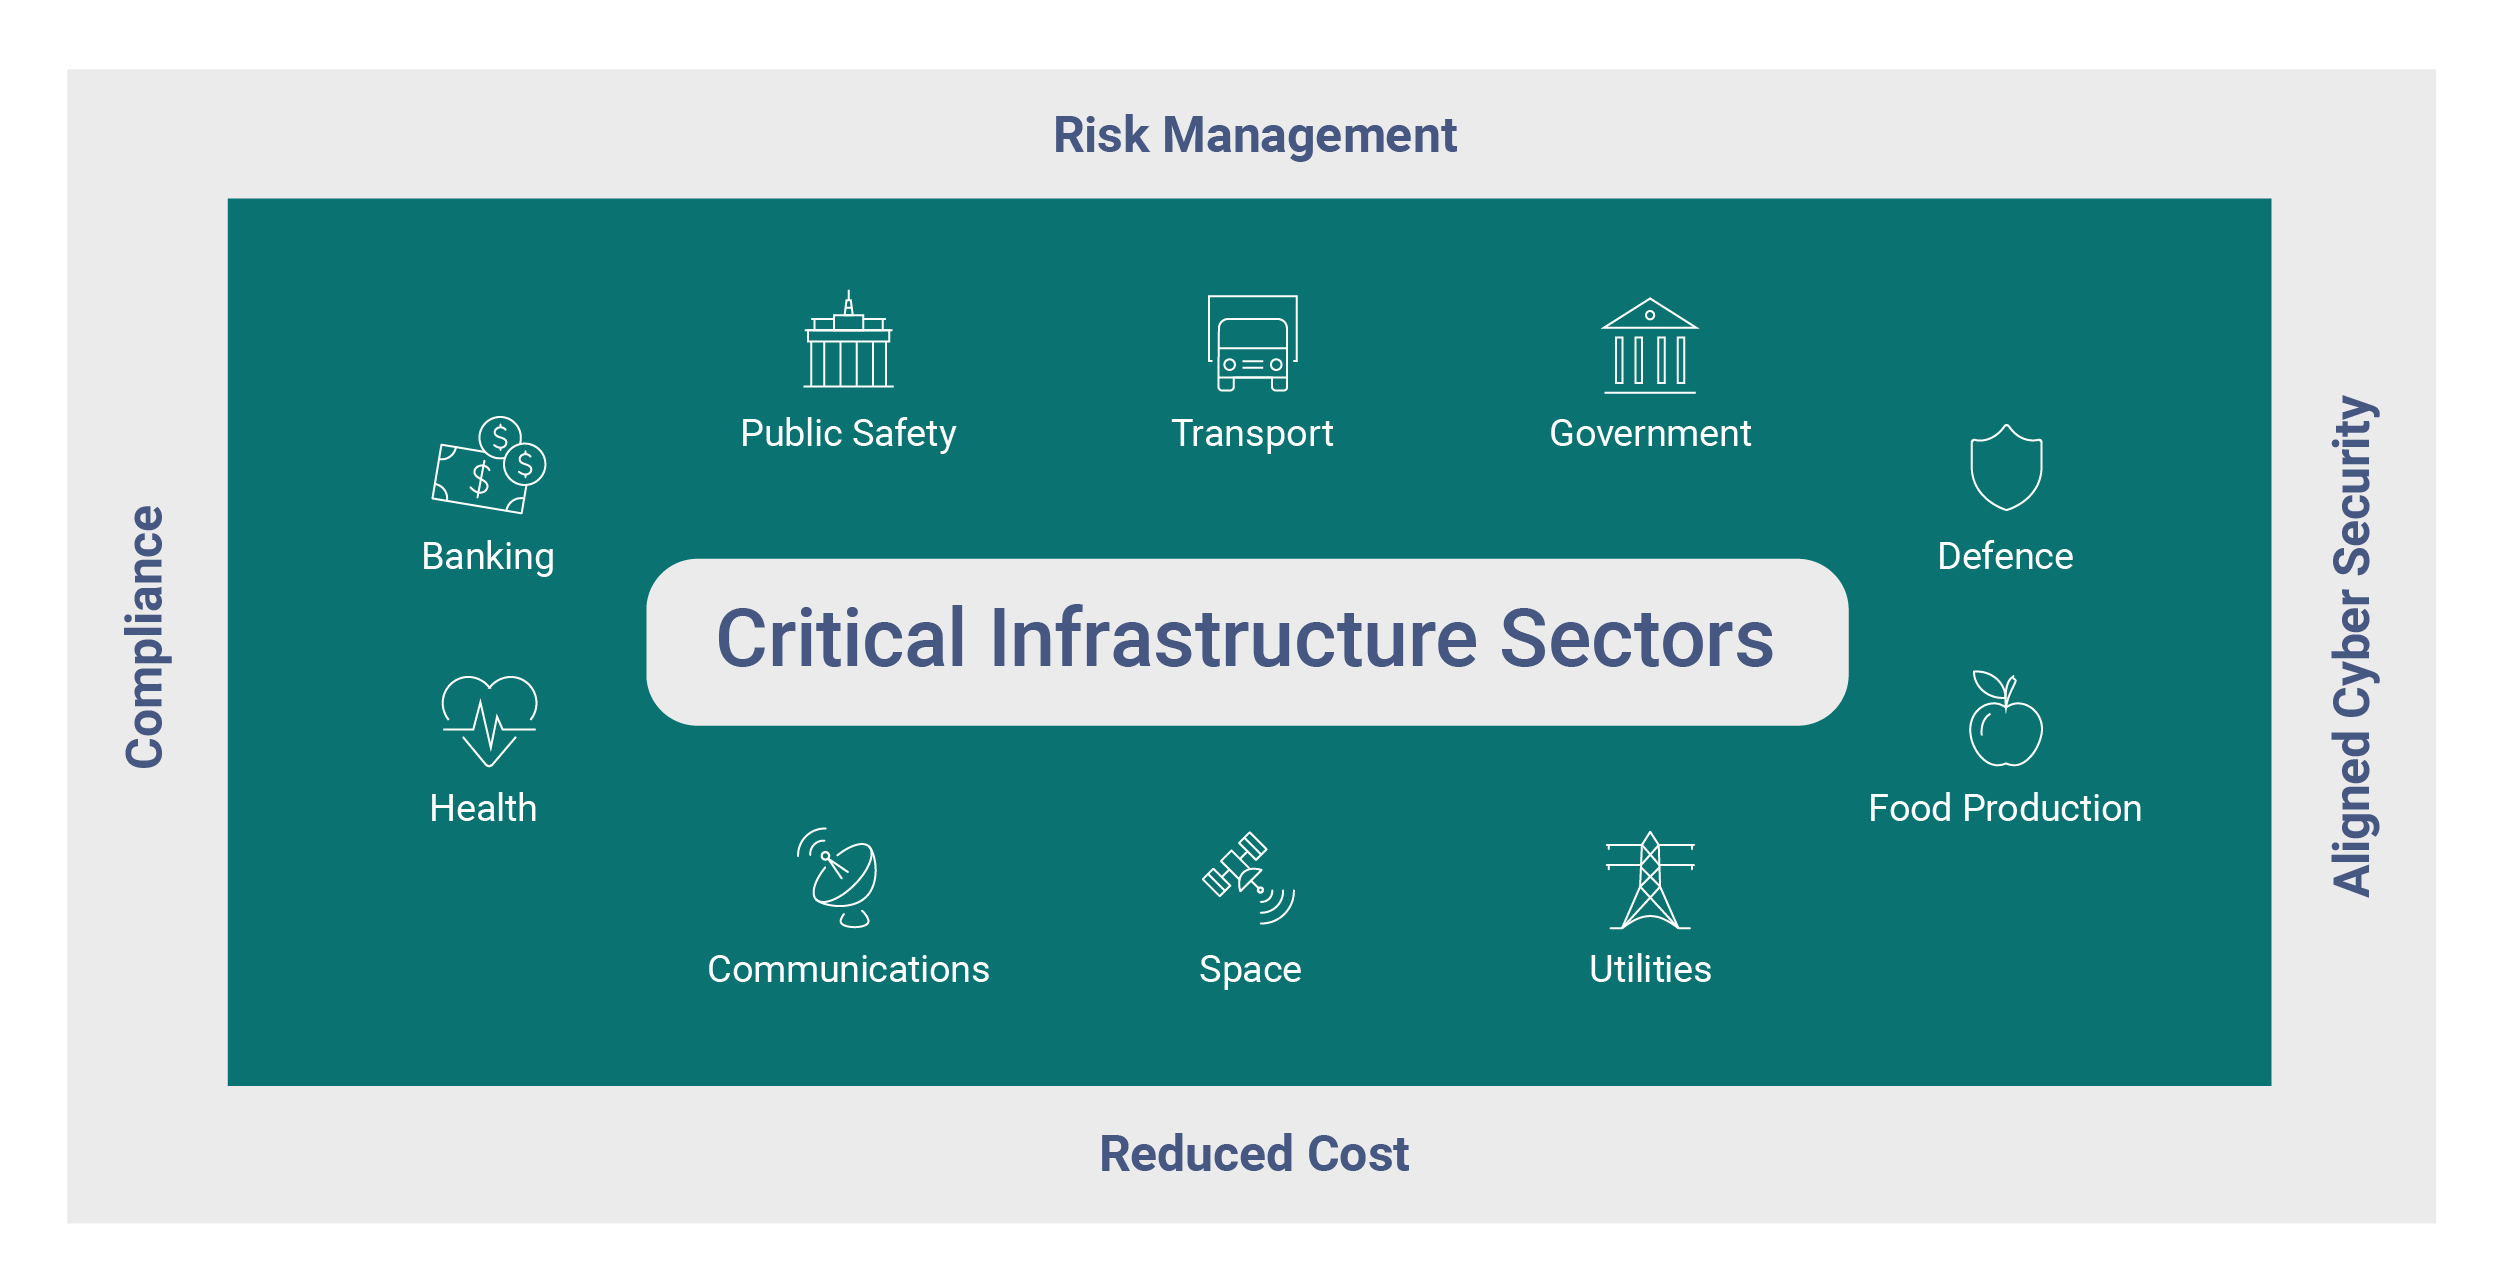 Critical Infrastructure Sectors